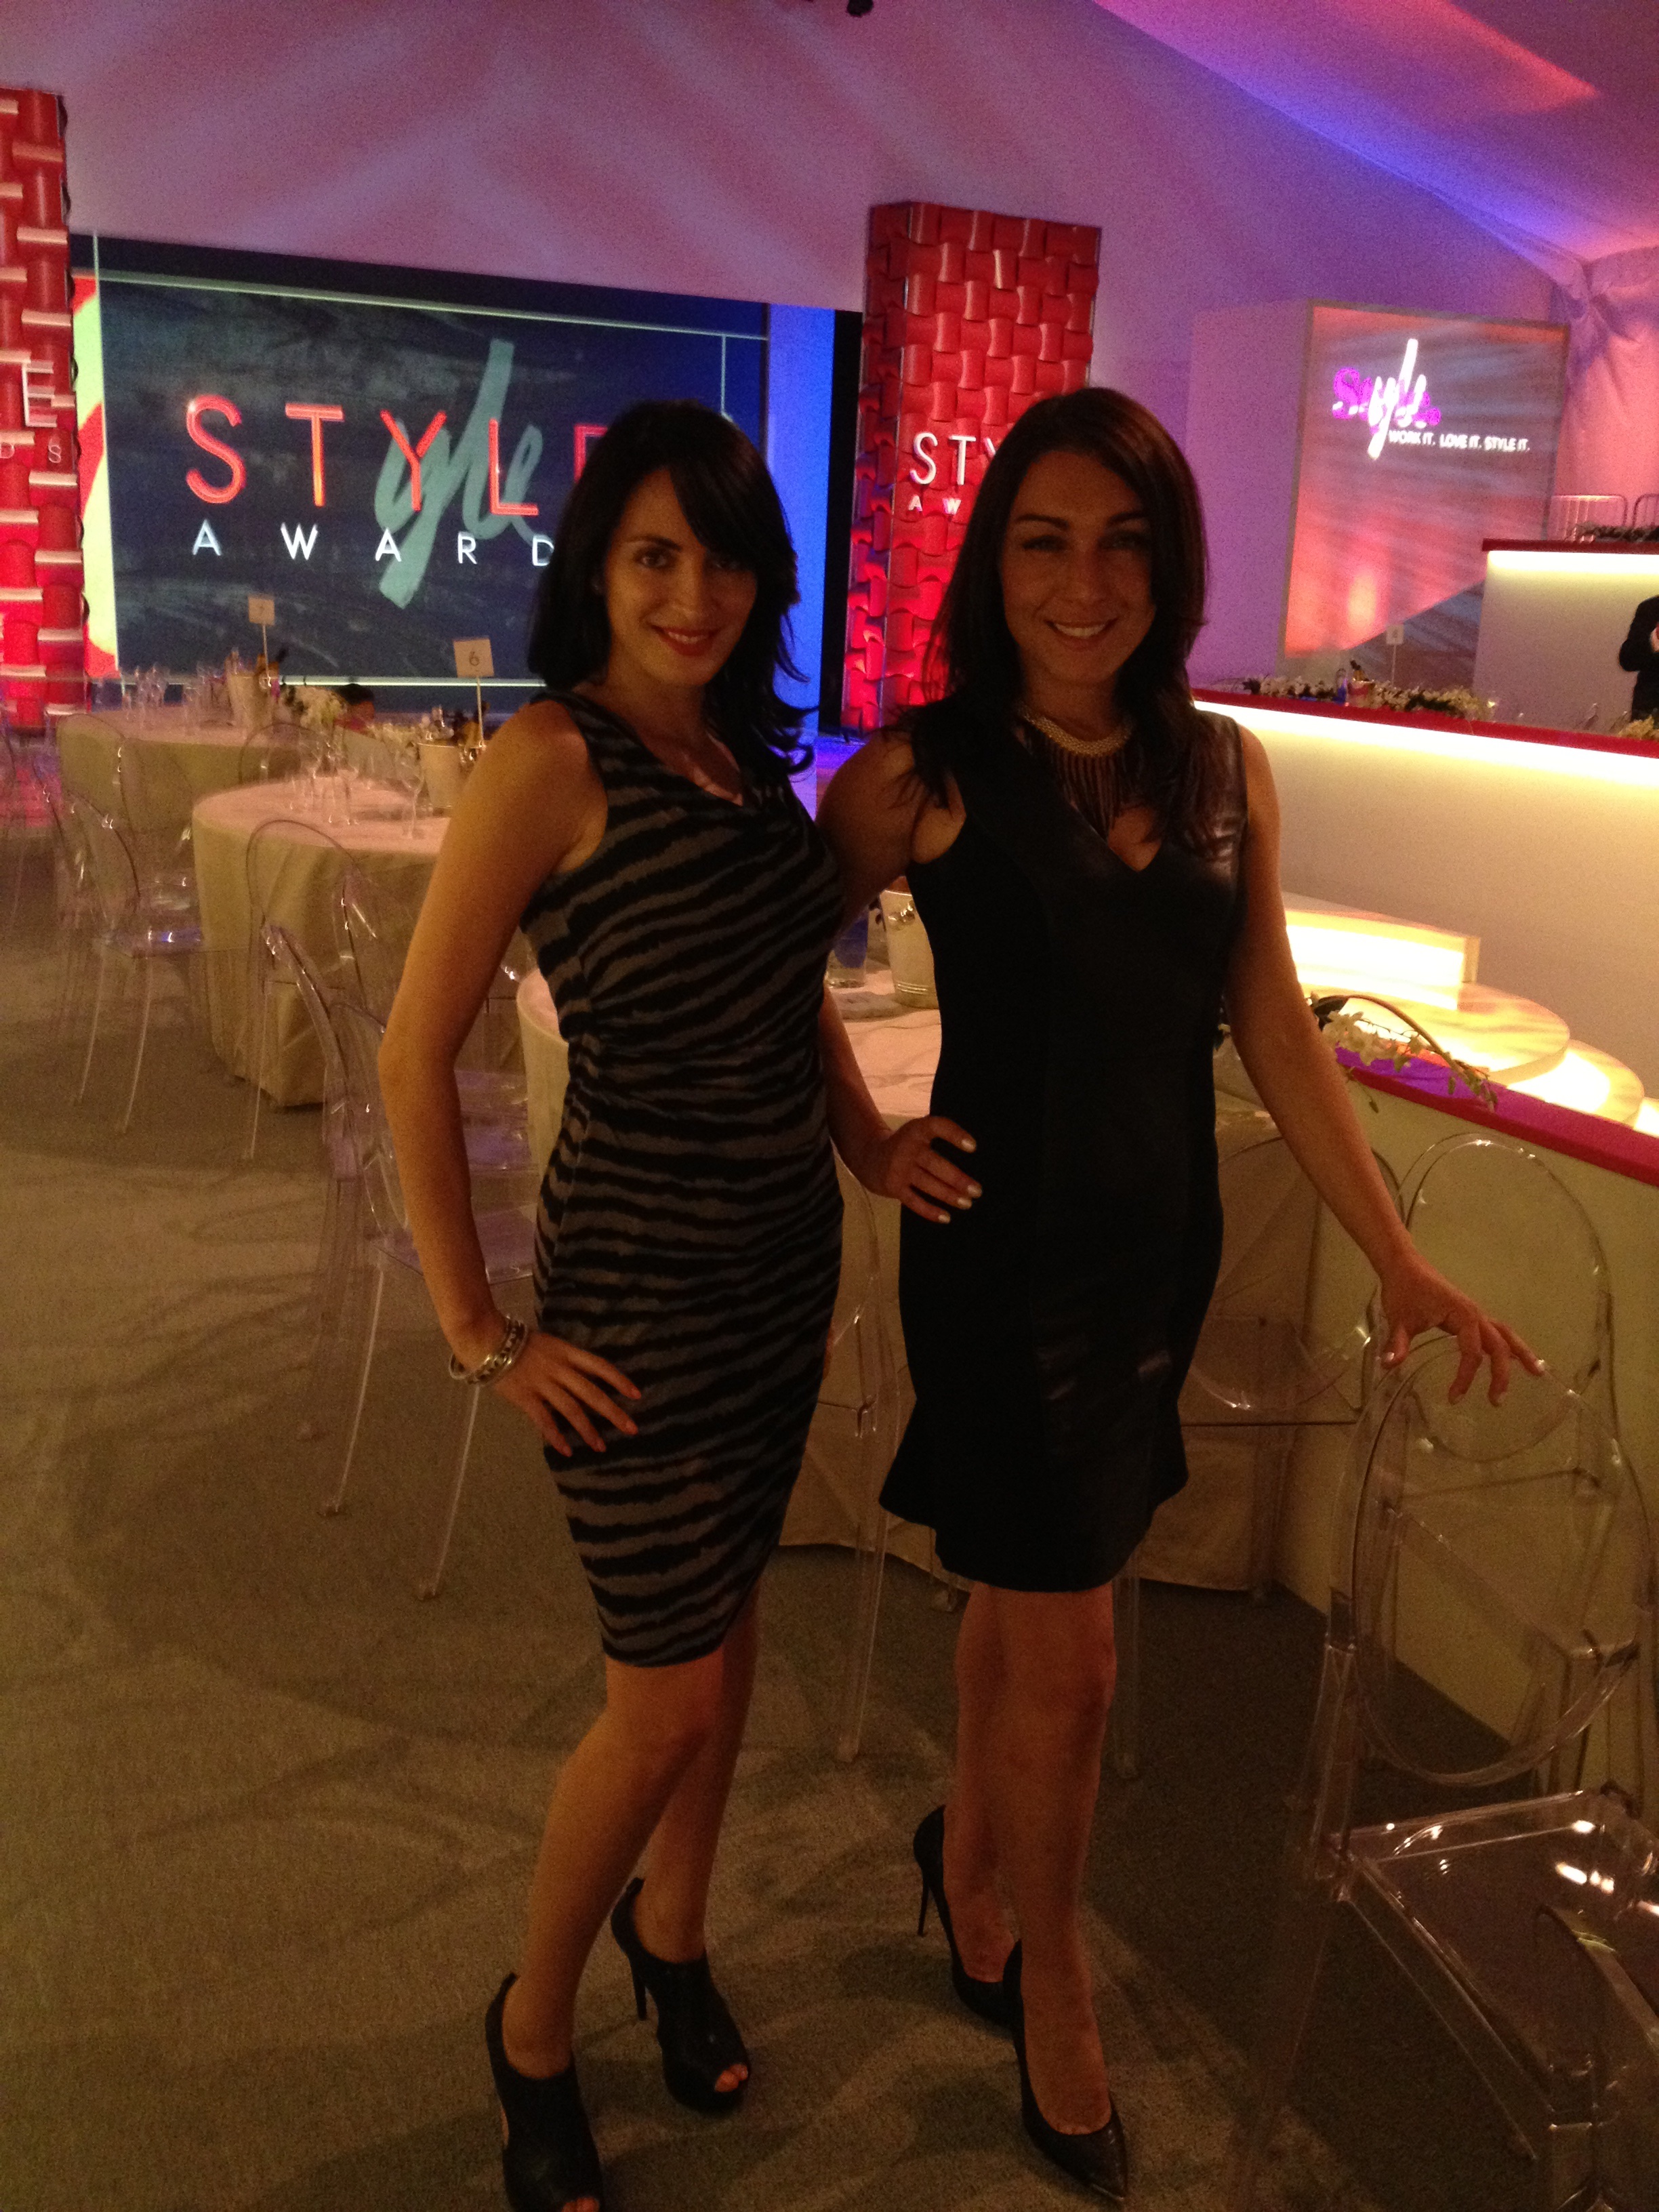 Lana Lovada and Jasmine Golubic at event of Style Awards